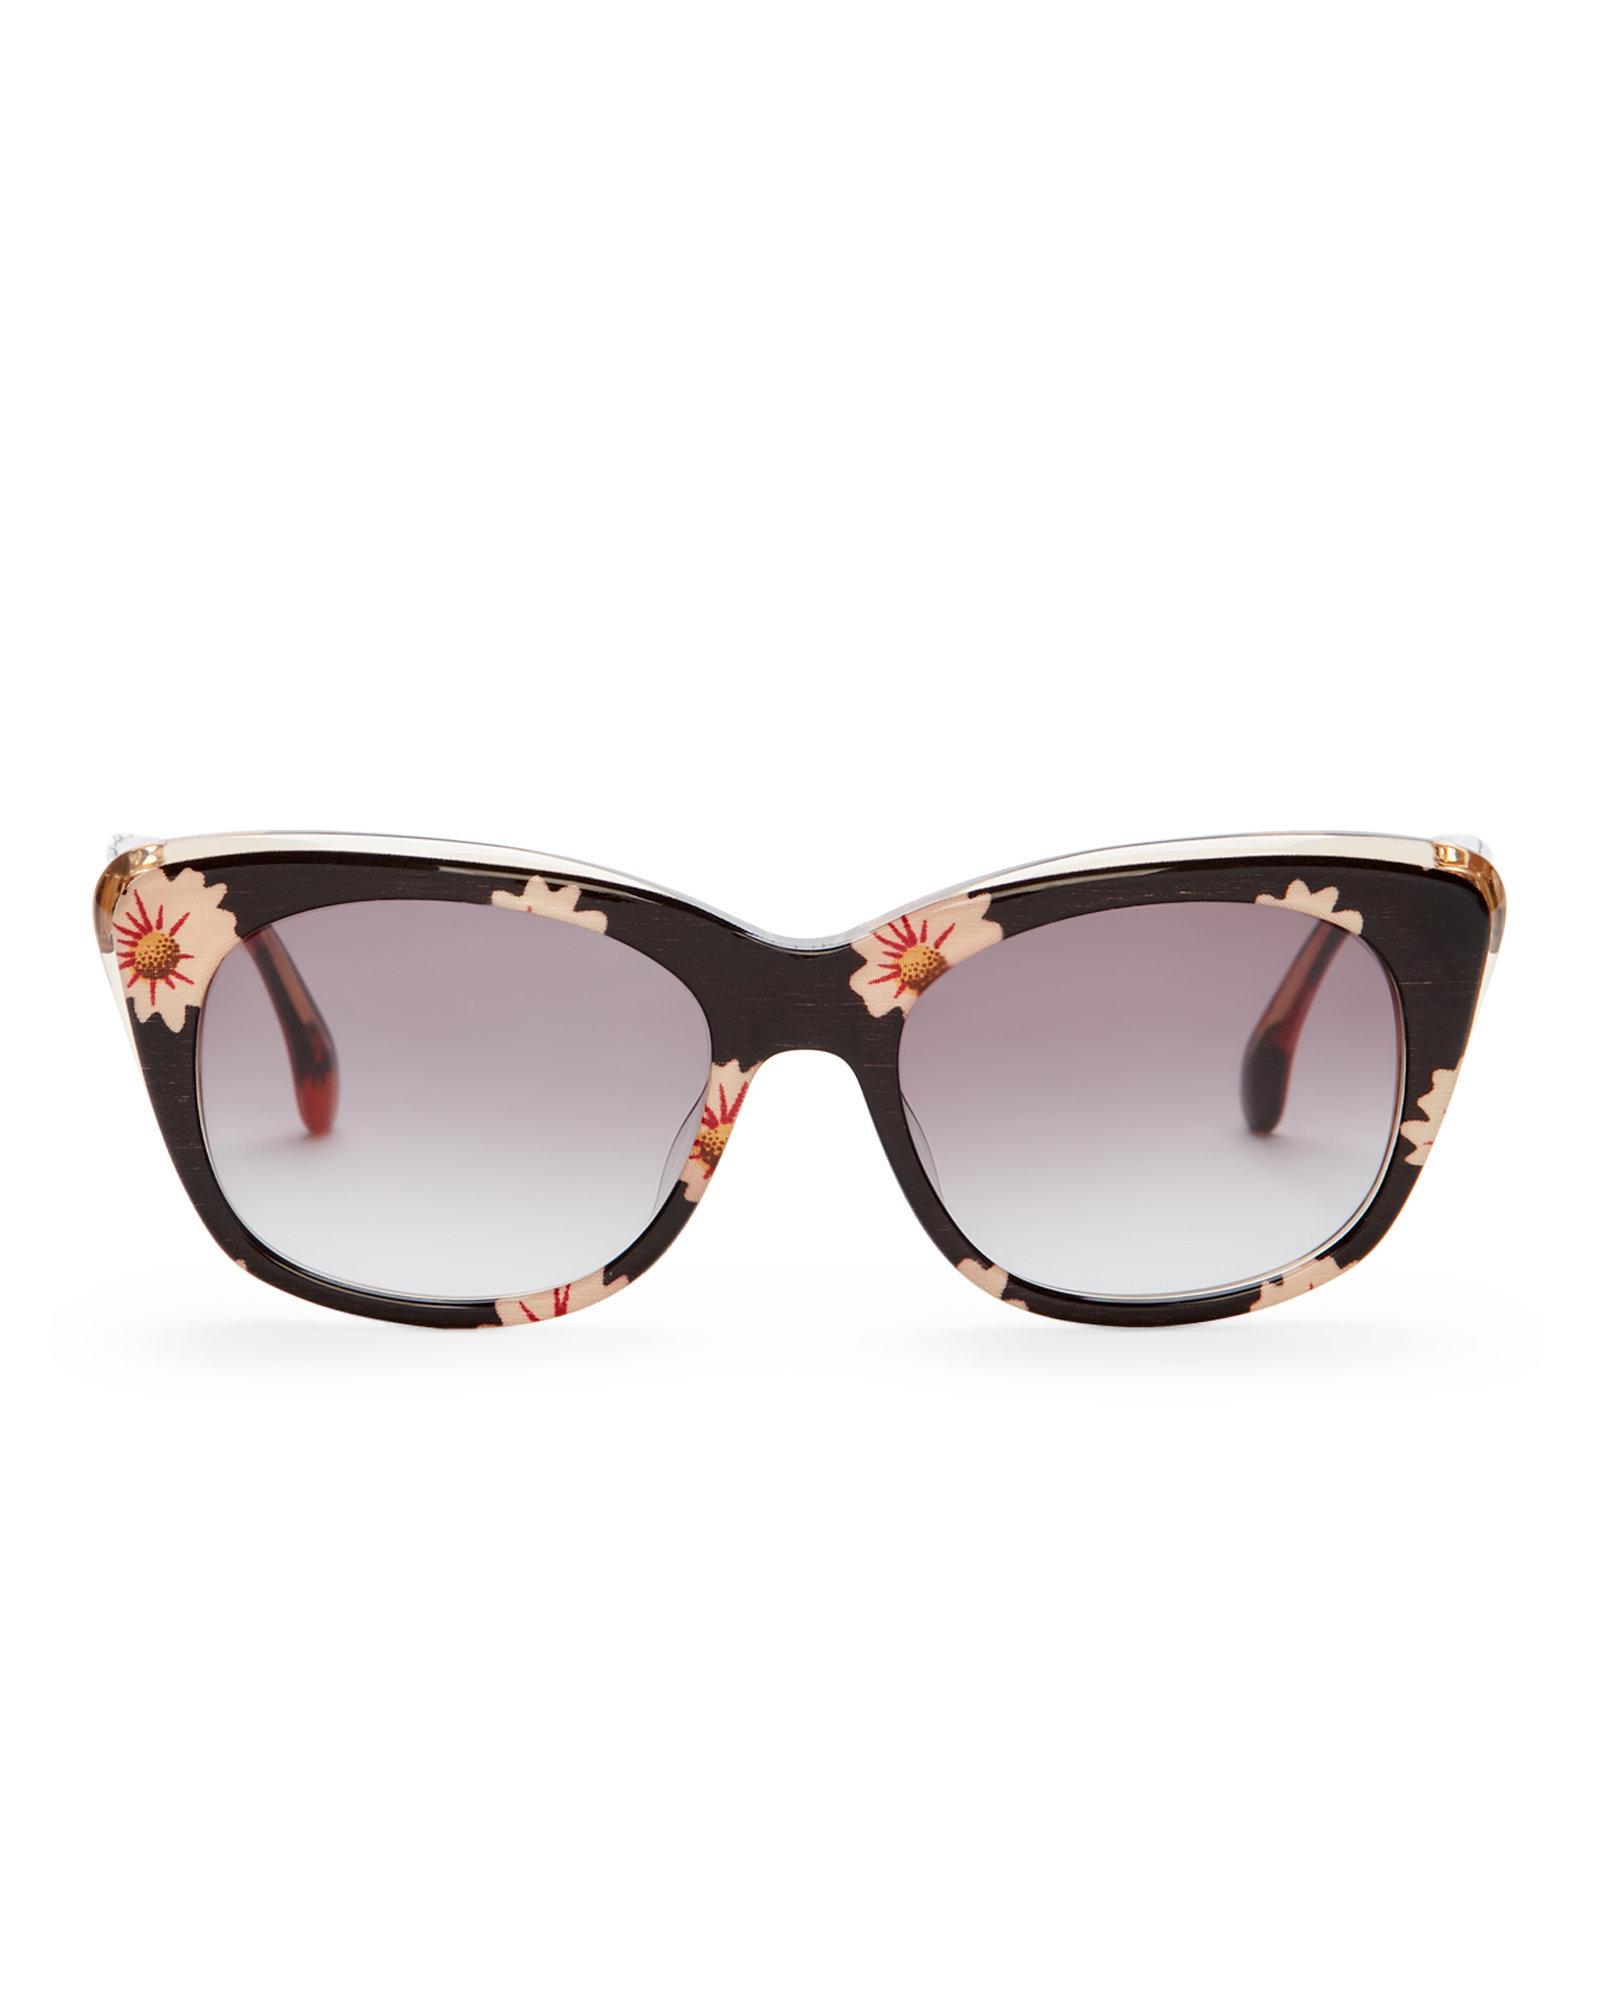 Download TOMS 20000759 Kitty Black Floral Cat Eye Sunglasses - Lyst